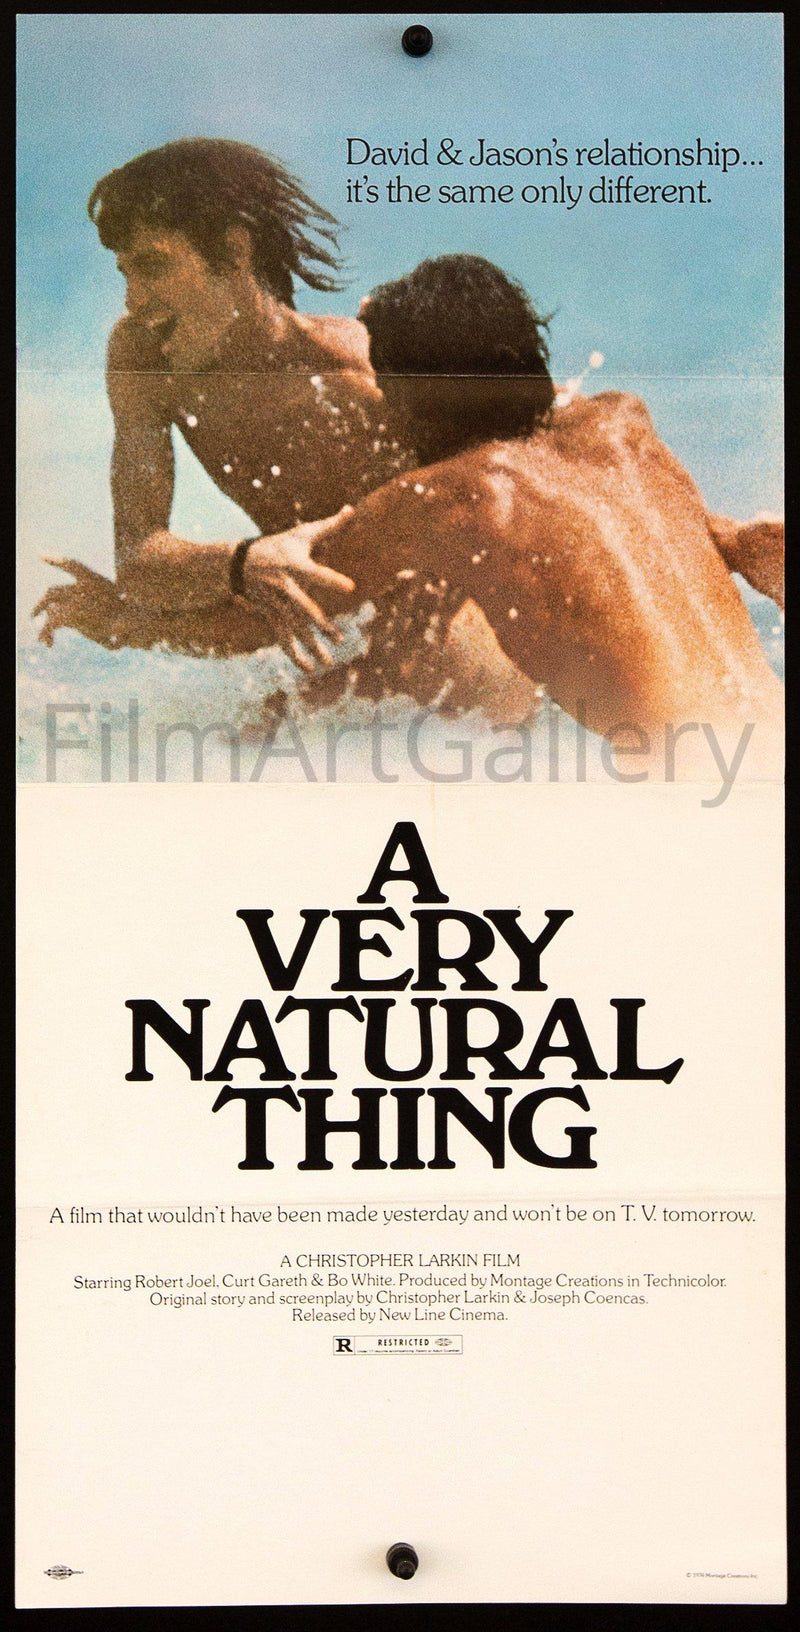 A Very Natural Thing 10x20 Original Vintage Movie Poster